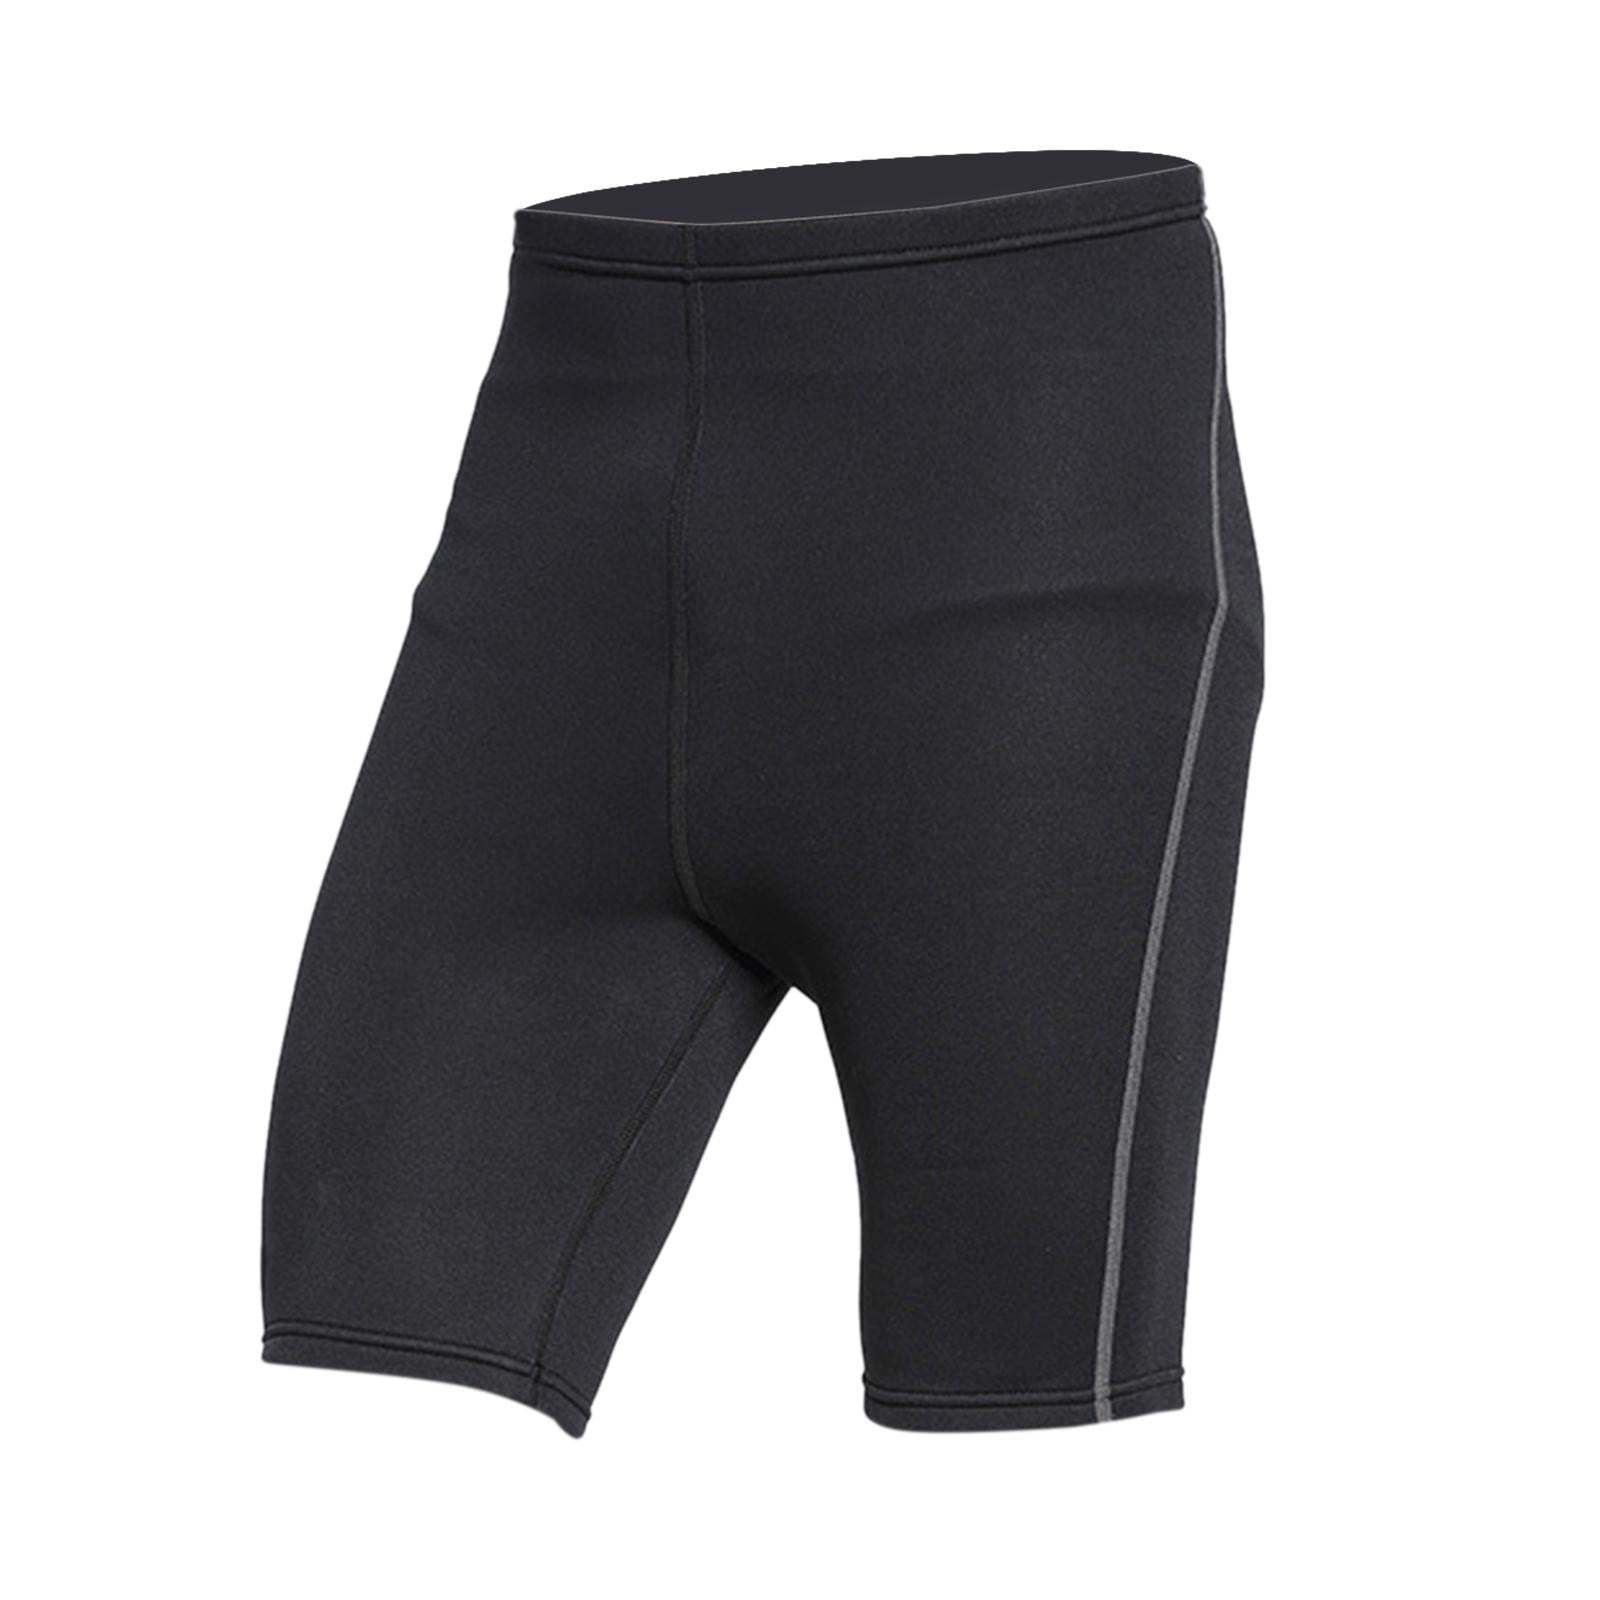 Neoprene Wetsuits Shorts Thick Warm Elastic Trunks Diving Swimming Pants L 